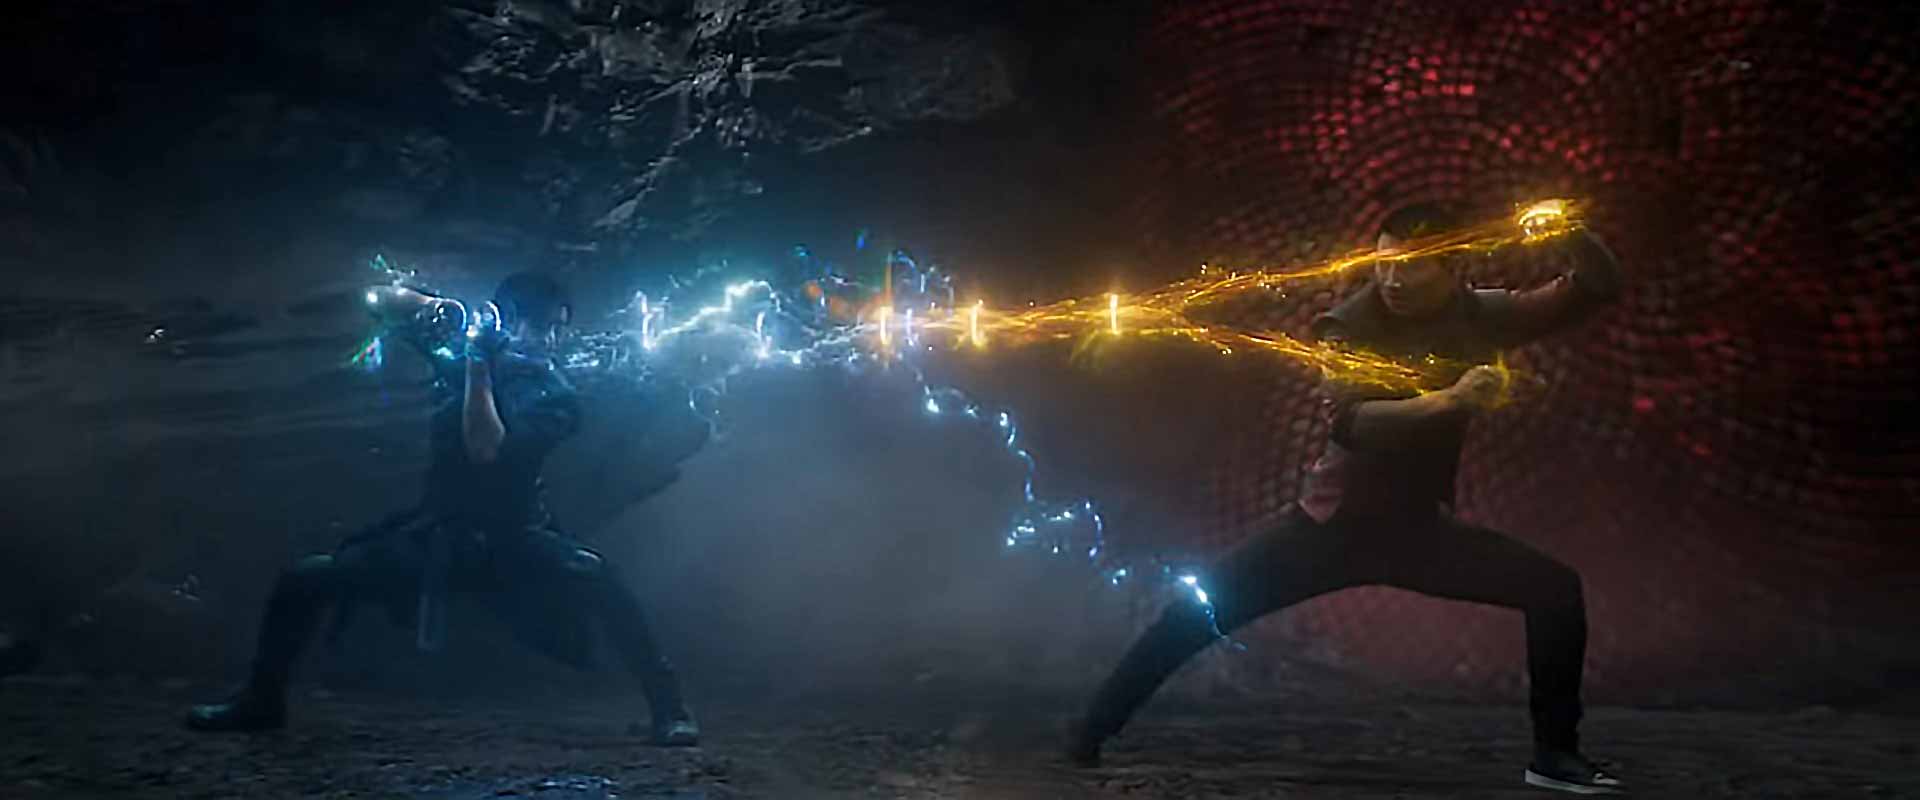 Shang-Chi and the Legend of the Ten Rings Climax Fight